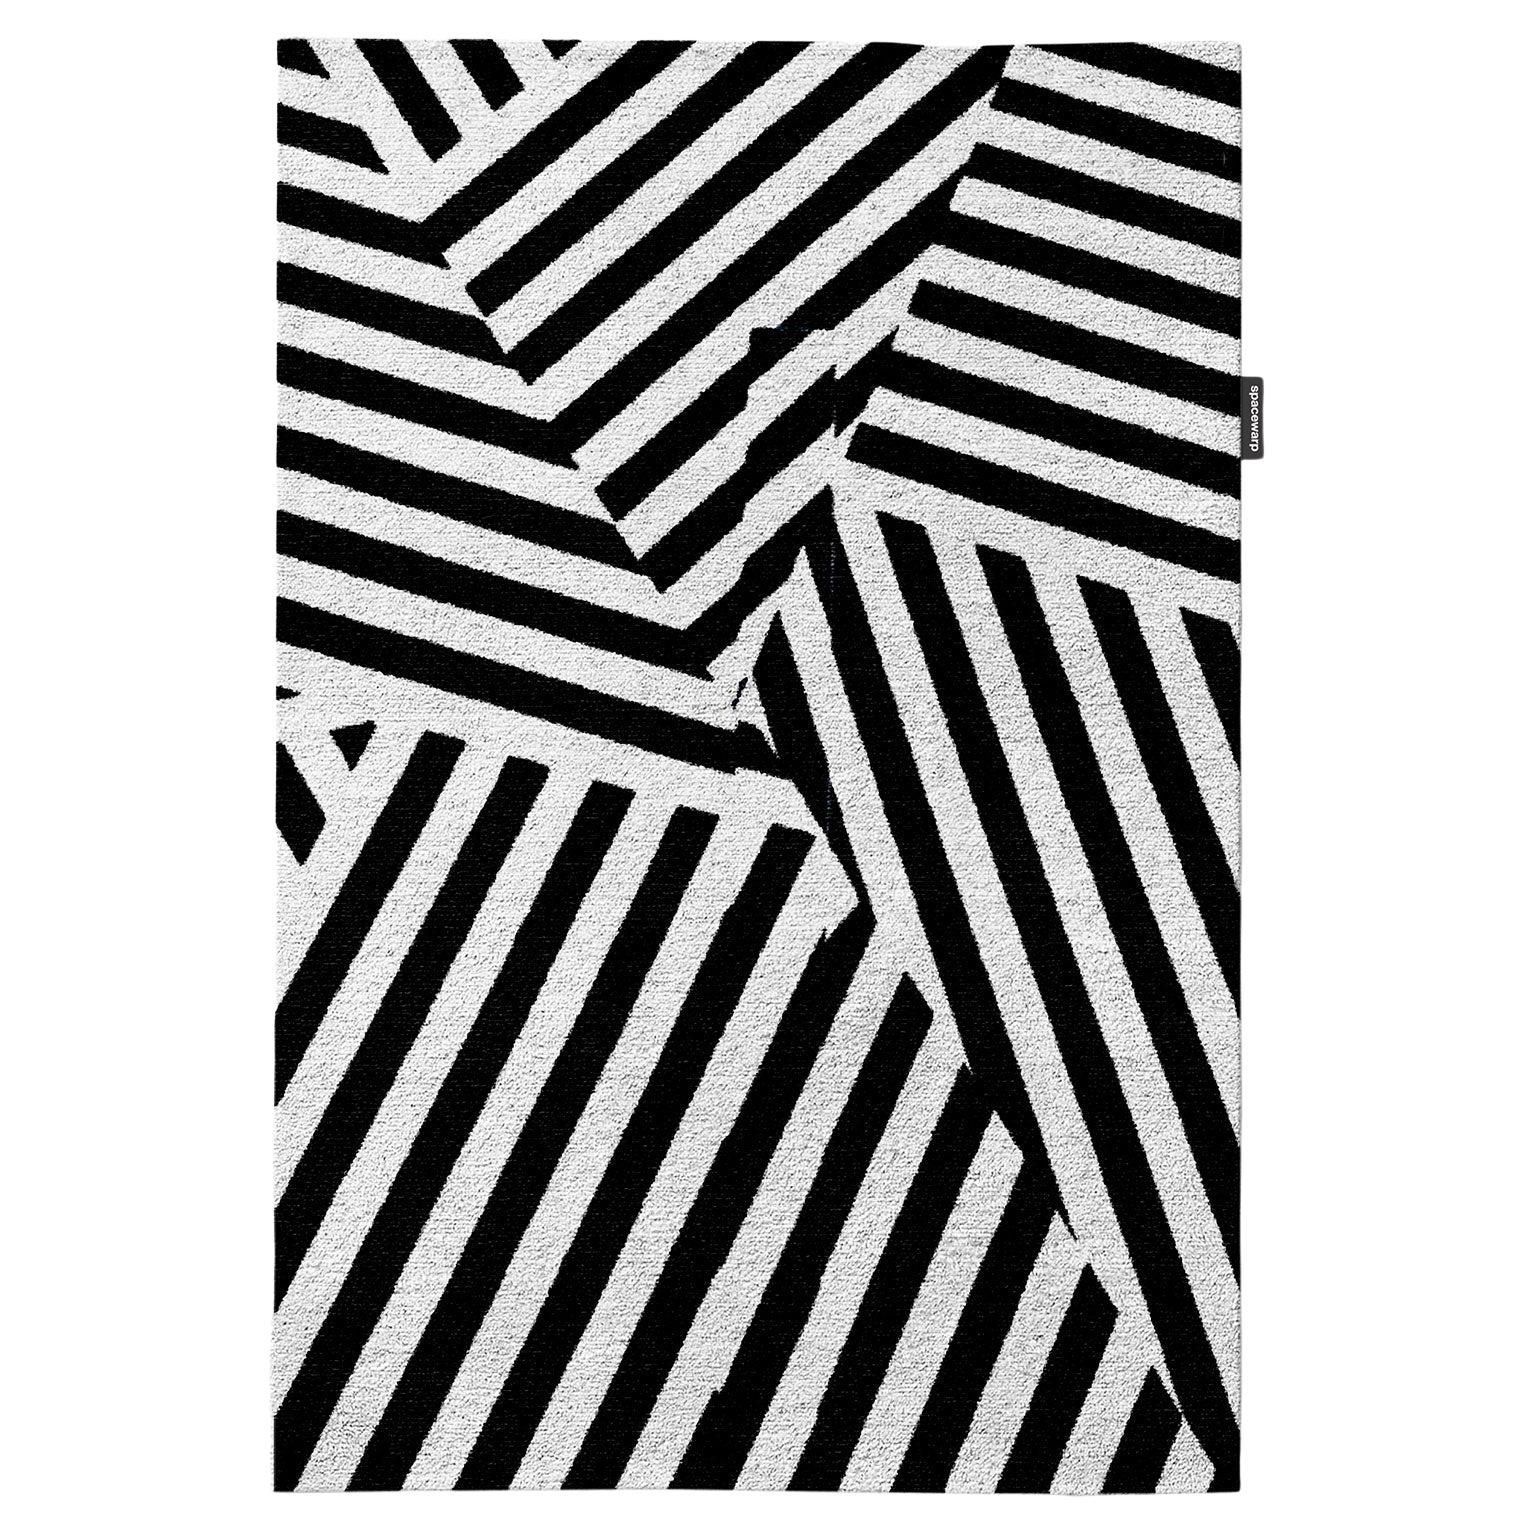 Hand Knotted Black and White Shibuya Crossing Rug by Spacewarp